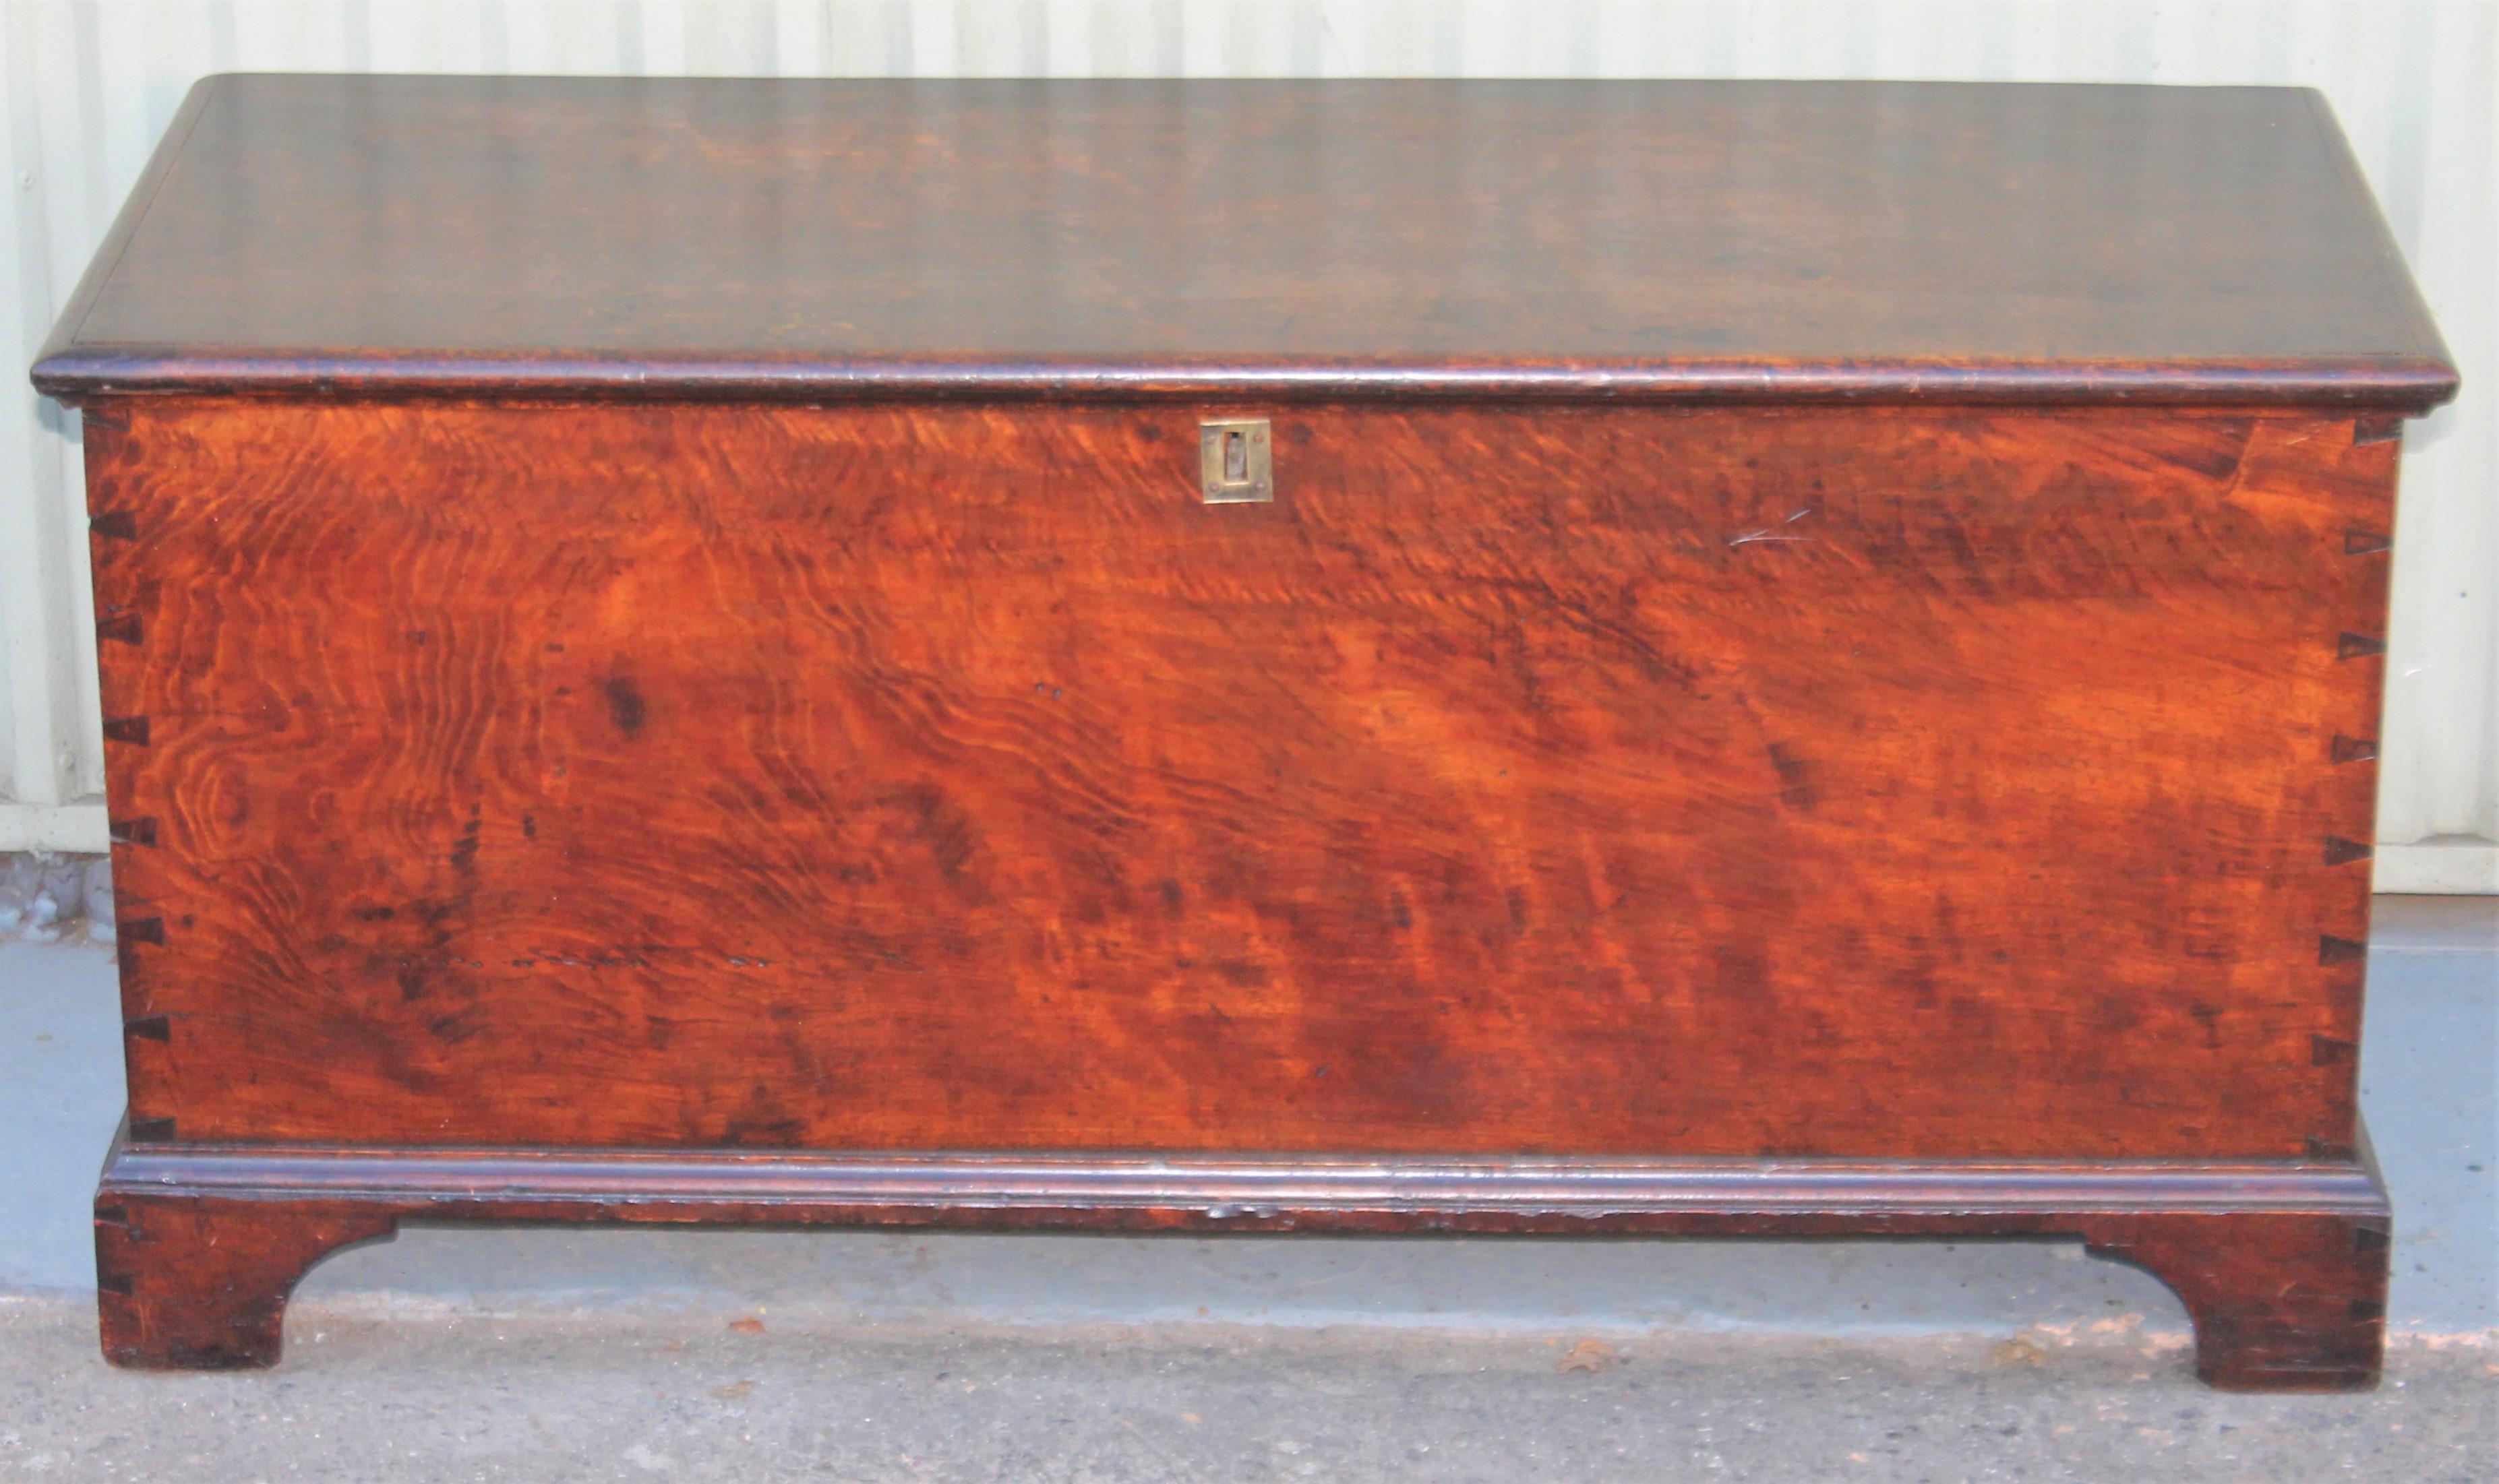 This fine and early 19th century walnut dovetailed blanket chest has an amazing old surface and in fine as found condition. The interior is very clean with a button box till and original brass key plate. It also retains the original hand forged